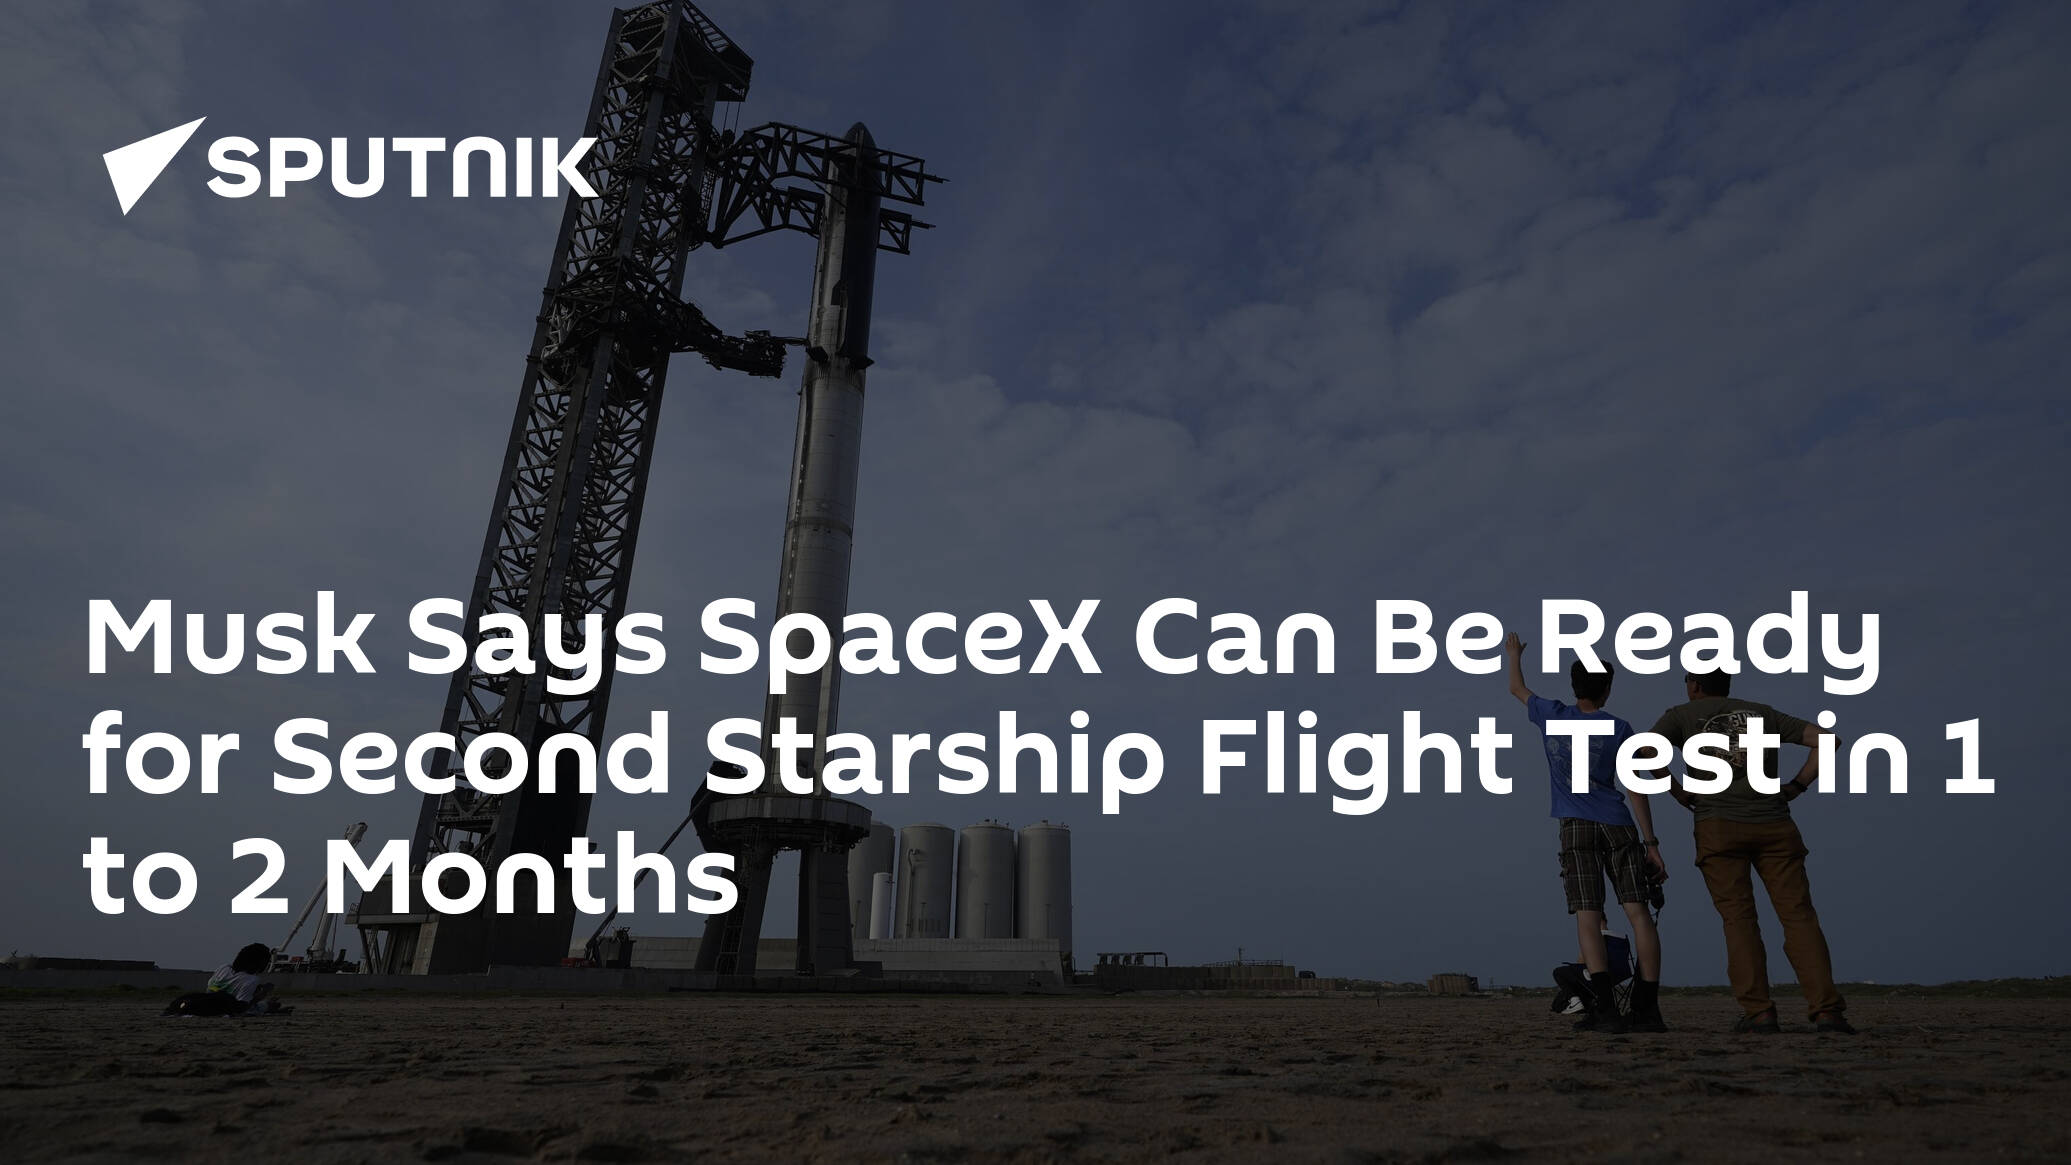 Musk Says SpaceX Can Be Ready for Second Starship Flight Test in 1 to 2 Months